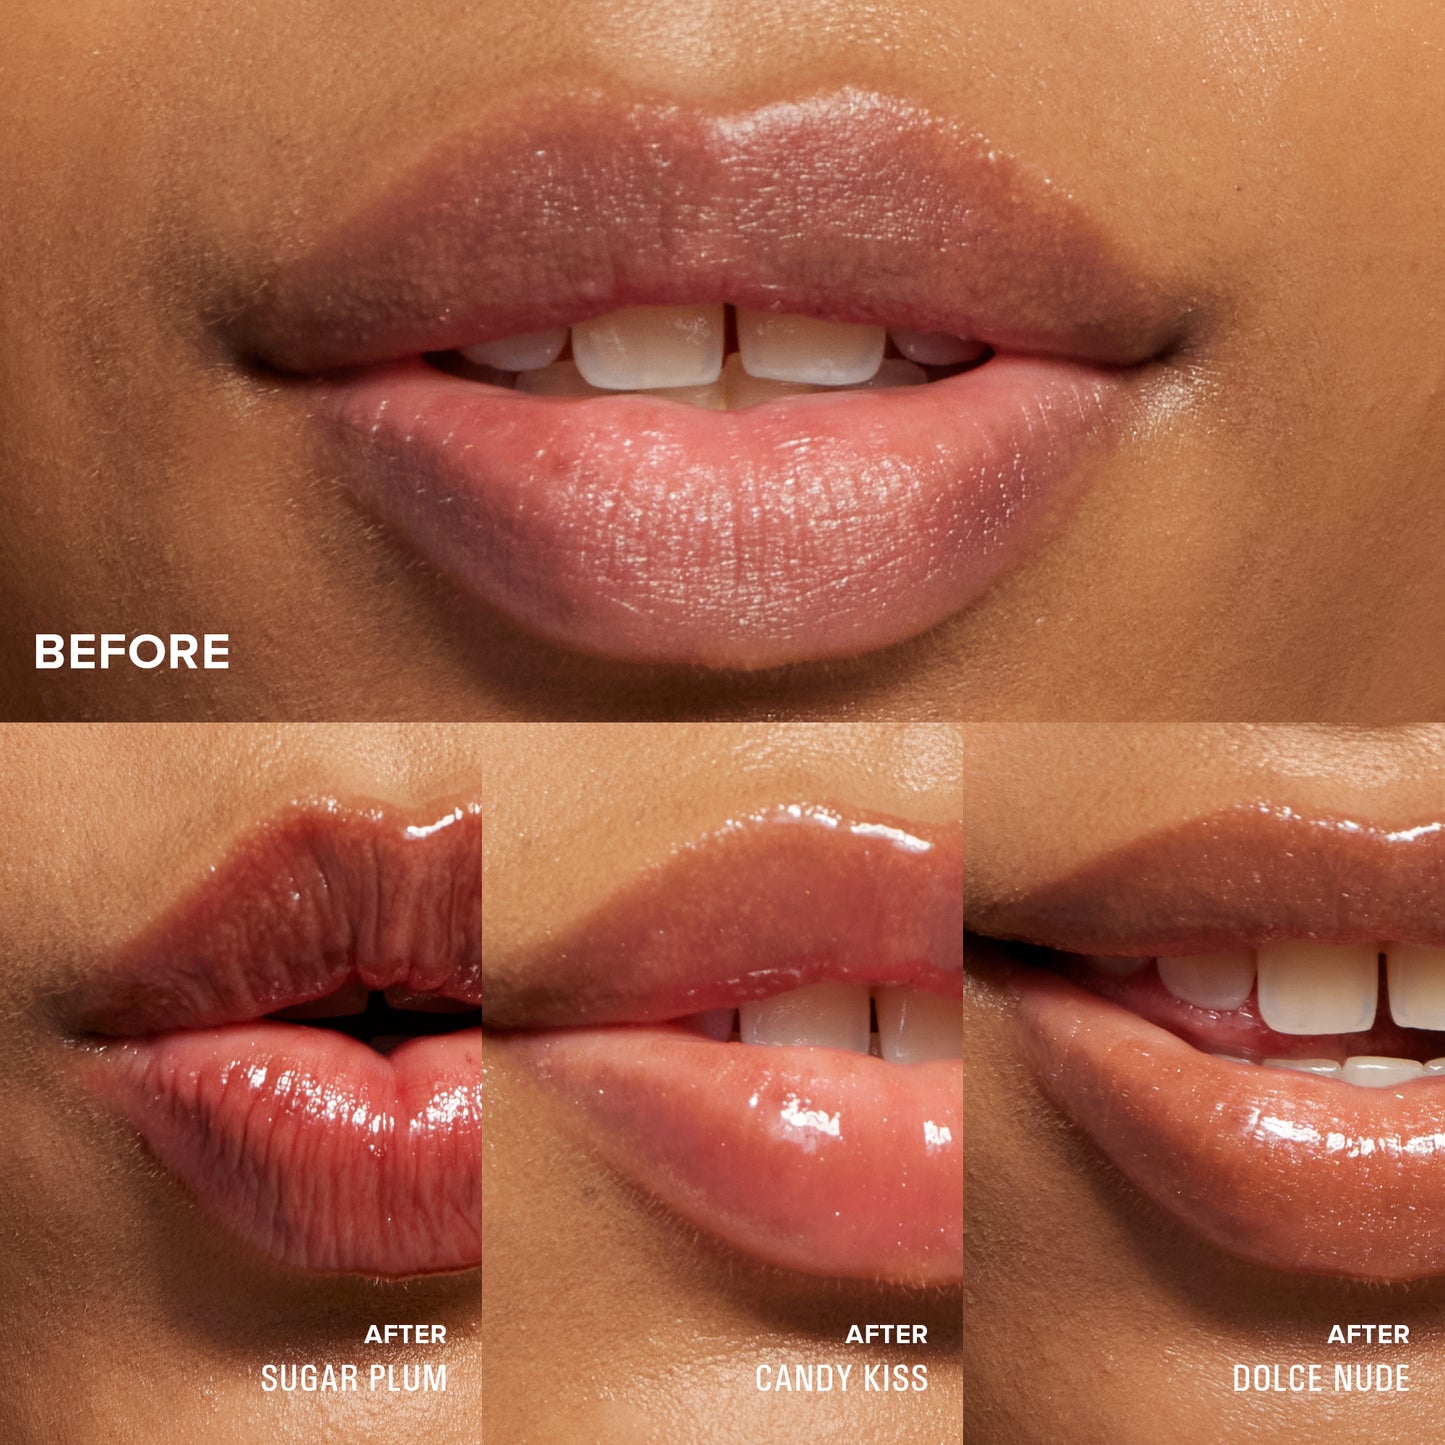 DOLCE NUDE CANDY KISS SUGAR PLUM BEFORE AND AFTER ON MODEL LIPS